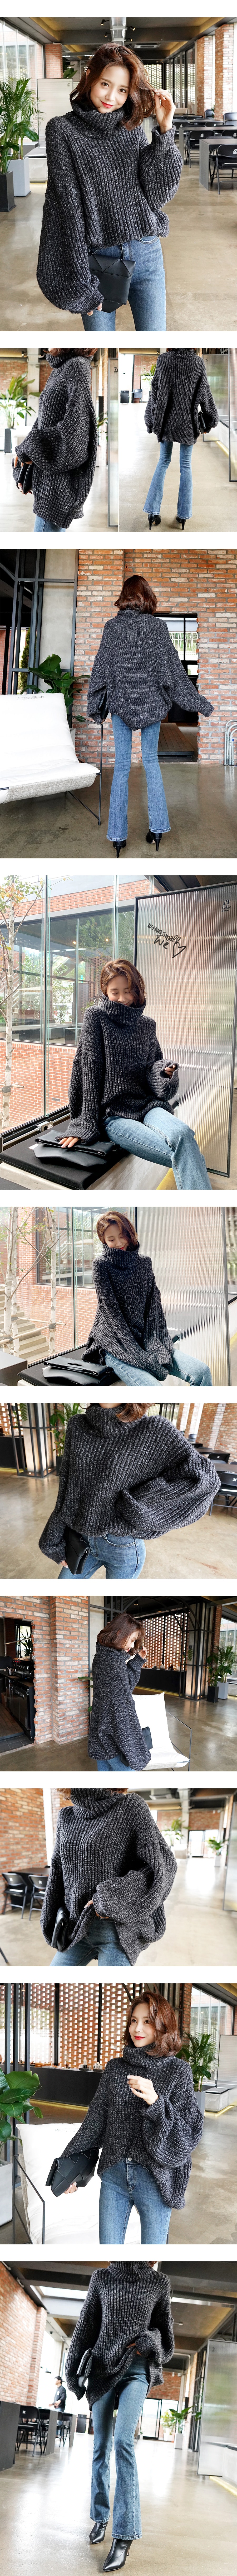 WINGS Oversized Turtleneck Sweater #Charcoal One Size(Free)